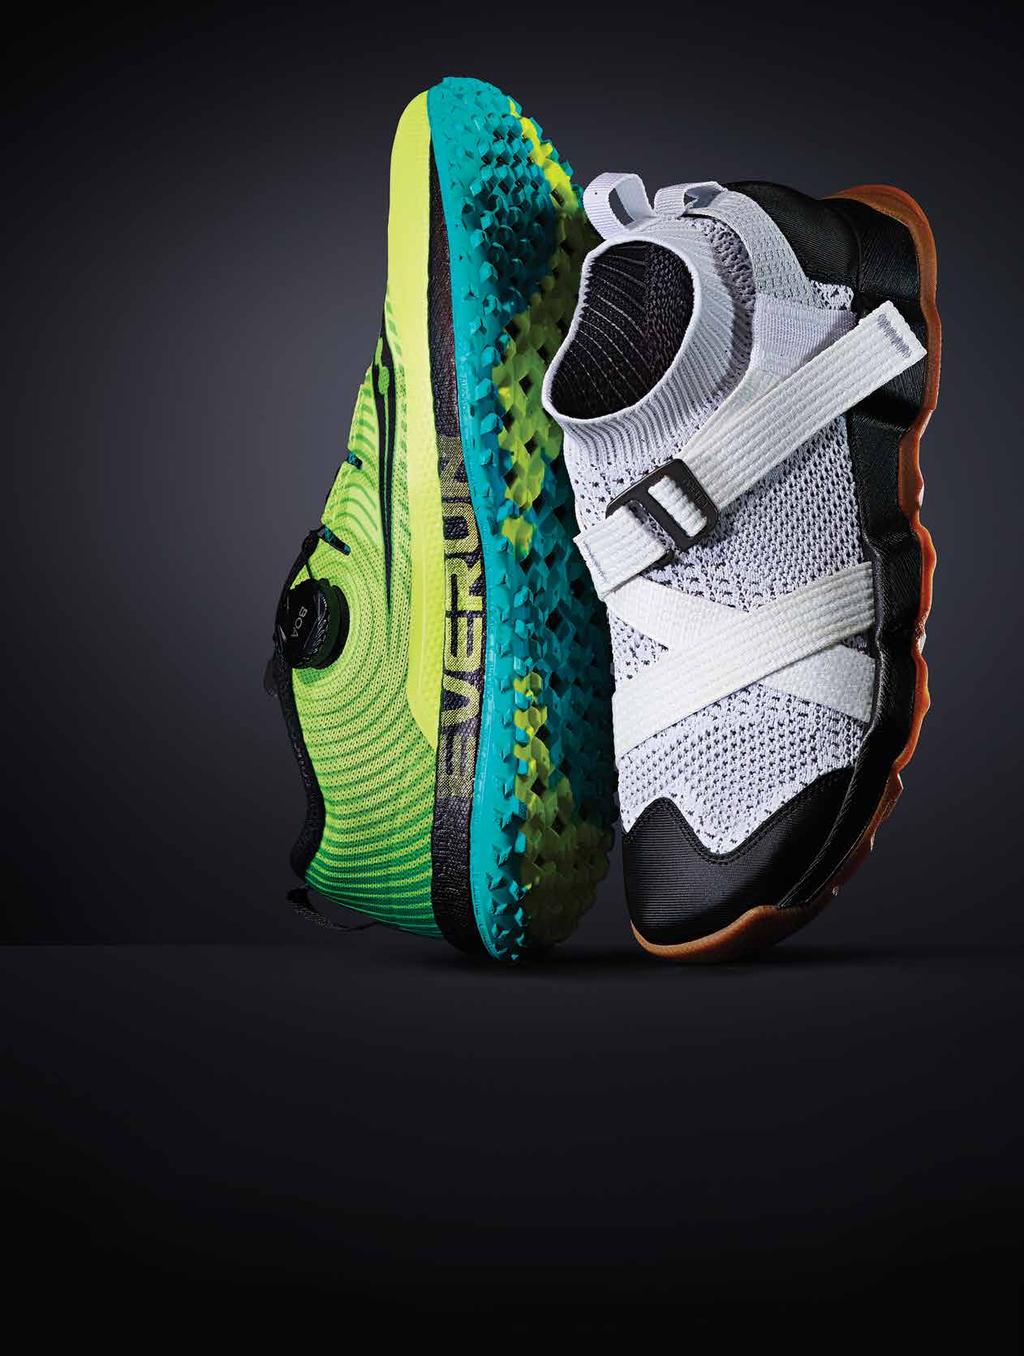 14 JANUARY 2019 CONTENTS 48 TECH TO TREK Technology is at the forefront of fall 19 outdoor shoes.